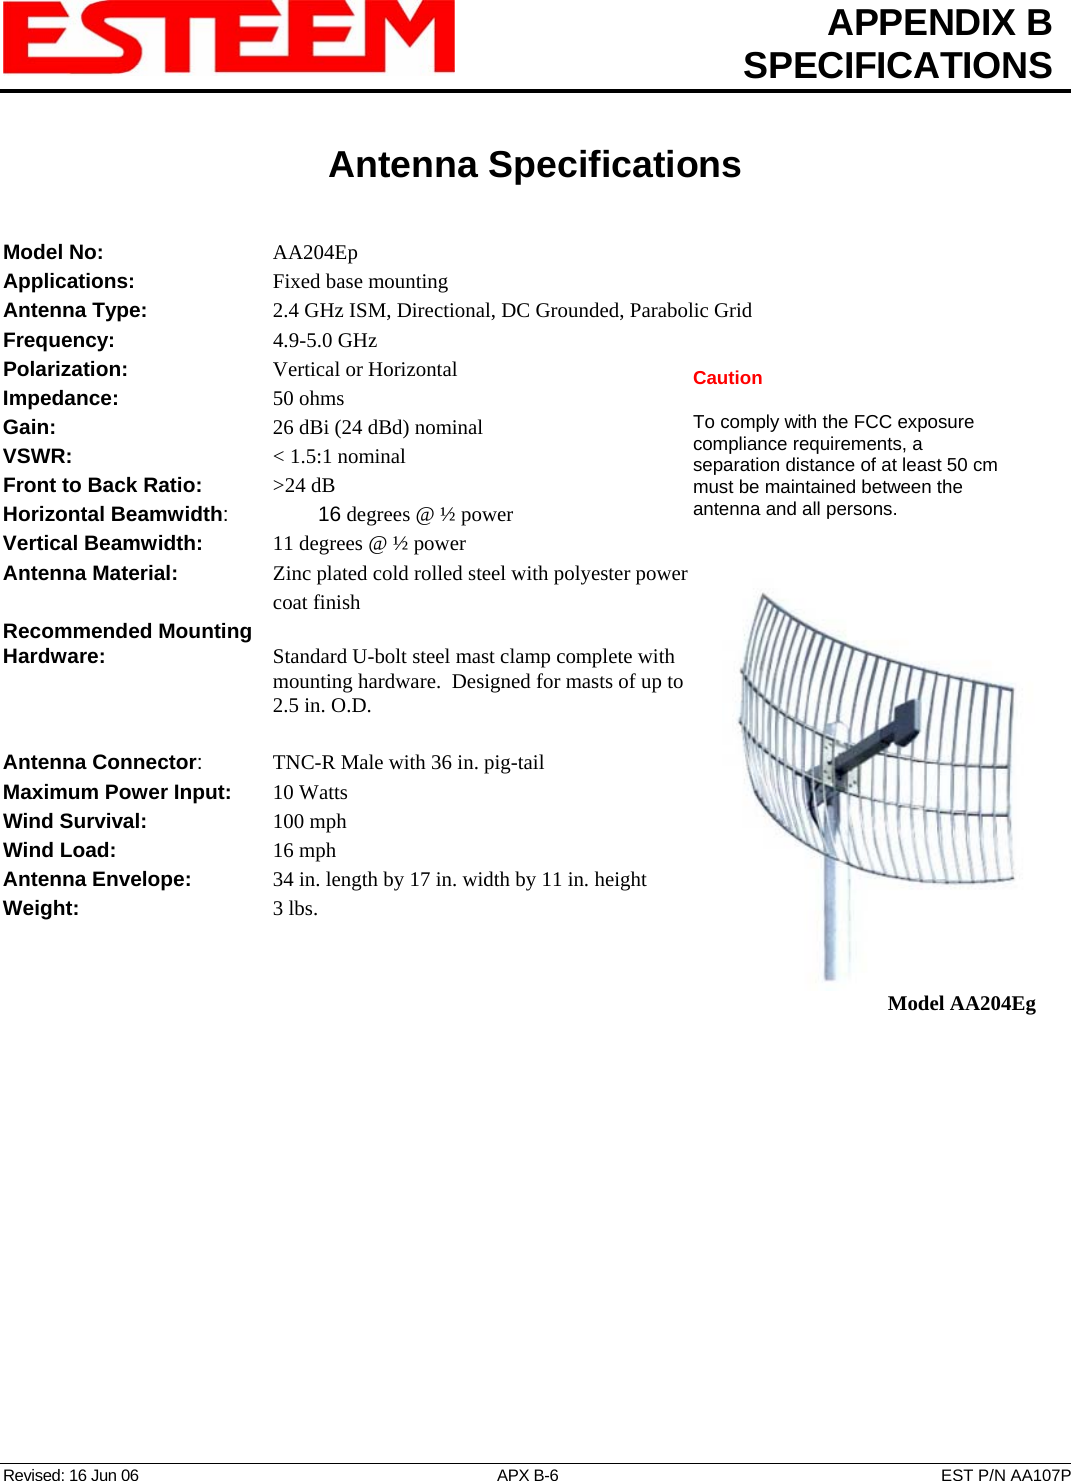  APPENDIX B  SPECIFICATIONS   Antenna Specifications   Revised: 16 Jun 06  APX B-6  EST P/N AA107P Model No:    AA204Ep Applications:         Fixed base mounting  Antenna Type:     2.4 GHz ISM, Directional, DC Grounded, Parabolic Grid Frequency:    4.9-5.0 GHz Polarization:    Vertical or Horizontal Caution  To comply with the FCC exposure compliance requirements, a separation distance of at least 50 cm must be maintained between the antenna and all persons. Impedance:    50 ohms Gain:     26 dBi (24 dBd) nominal VSWR:            &lt; 1.5:1 nominal  Front to Back Ratio:     &gt;24 dB Horizontal Beamwidth:  16 degrees @ ½ power Vertical Beamwidth:      11 degrees @ ½ power Antenna Material:     Zinc plated cold rolled steel with polyester power coat finish  Model AA204Eg Recommended Mounting  Hardware:    Standard U-bolt steel mast clamp complete with mounting hardware.  Designed for masts of up to 2.5 in. O.D.  Antenna Connector:   TNC-R Male with 36 in. pig-tail Maximum Power Input:     10 Watts Wind Survival:        100 mph Wind Load:          16 mph Antenna Envelope:   34 in. length by 17 in. width by 11 in. height Weight:           3 lbs.        